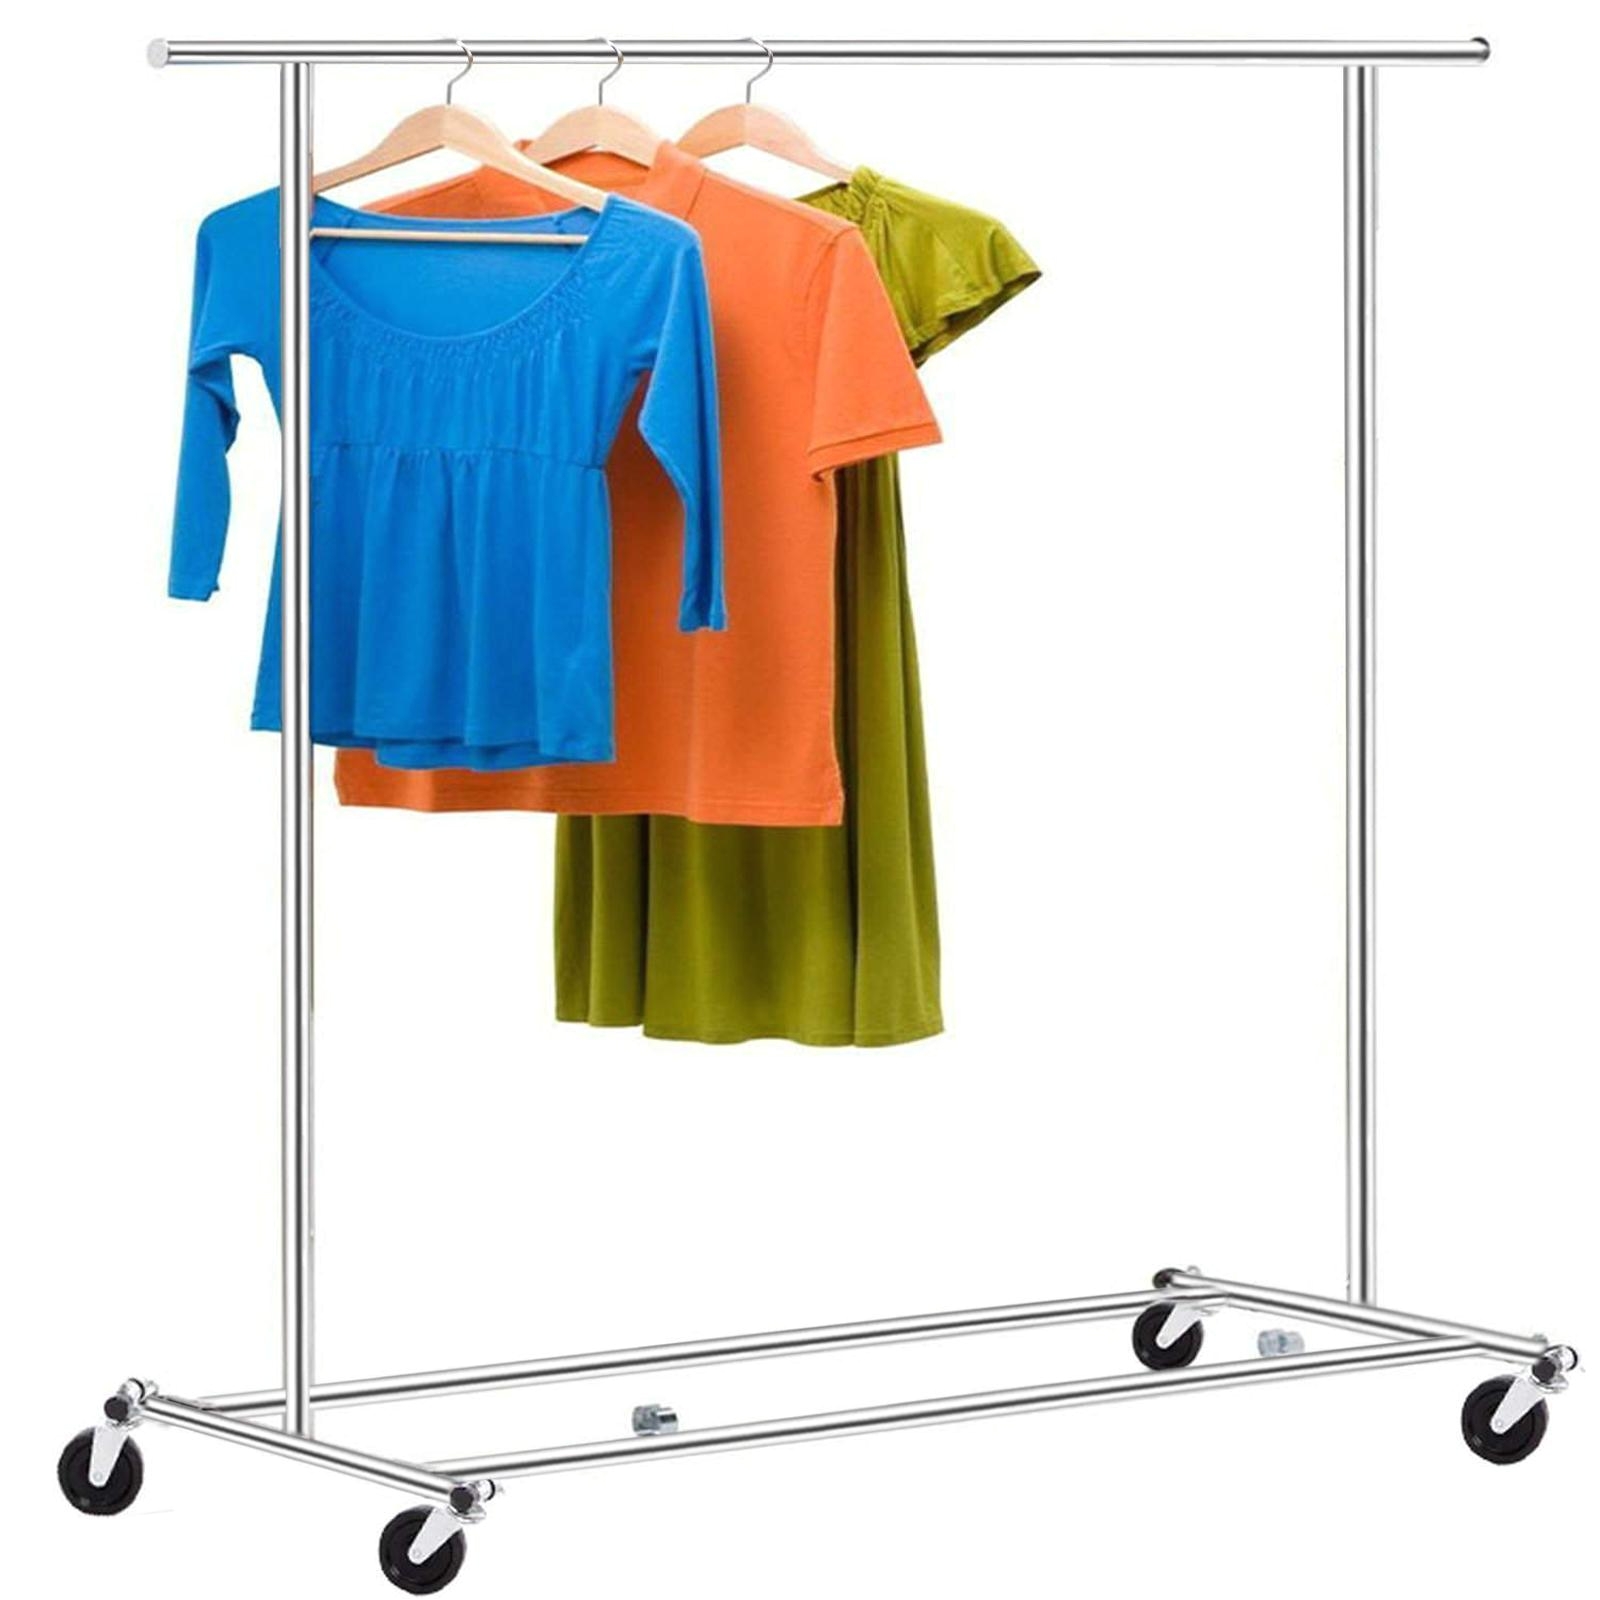 kimimart clothes stand rolling shelf rack heavy duty stainless steel metal portable commercial garment hanging racks walmart com